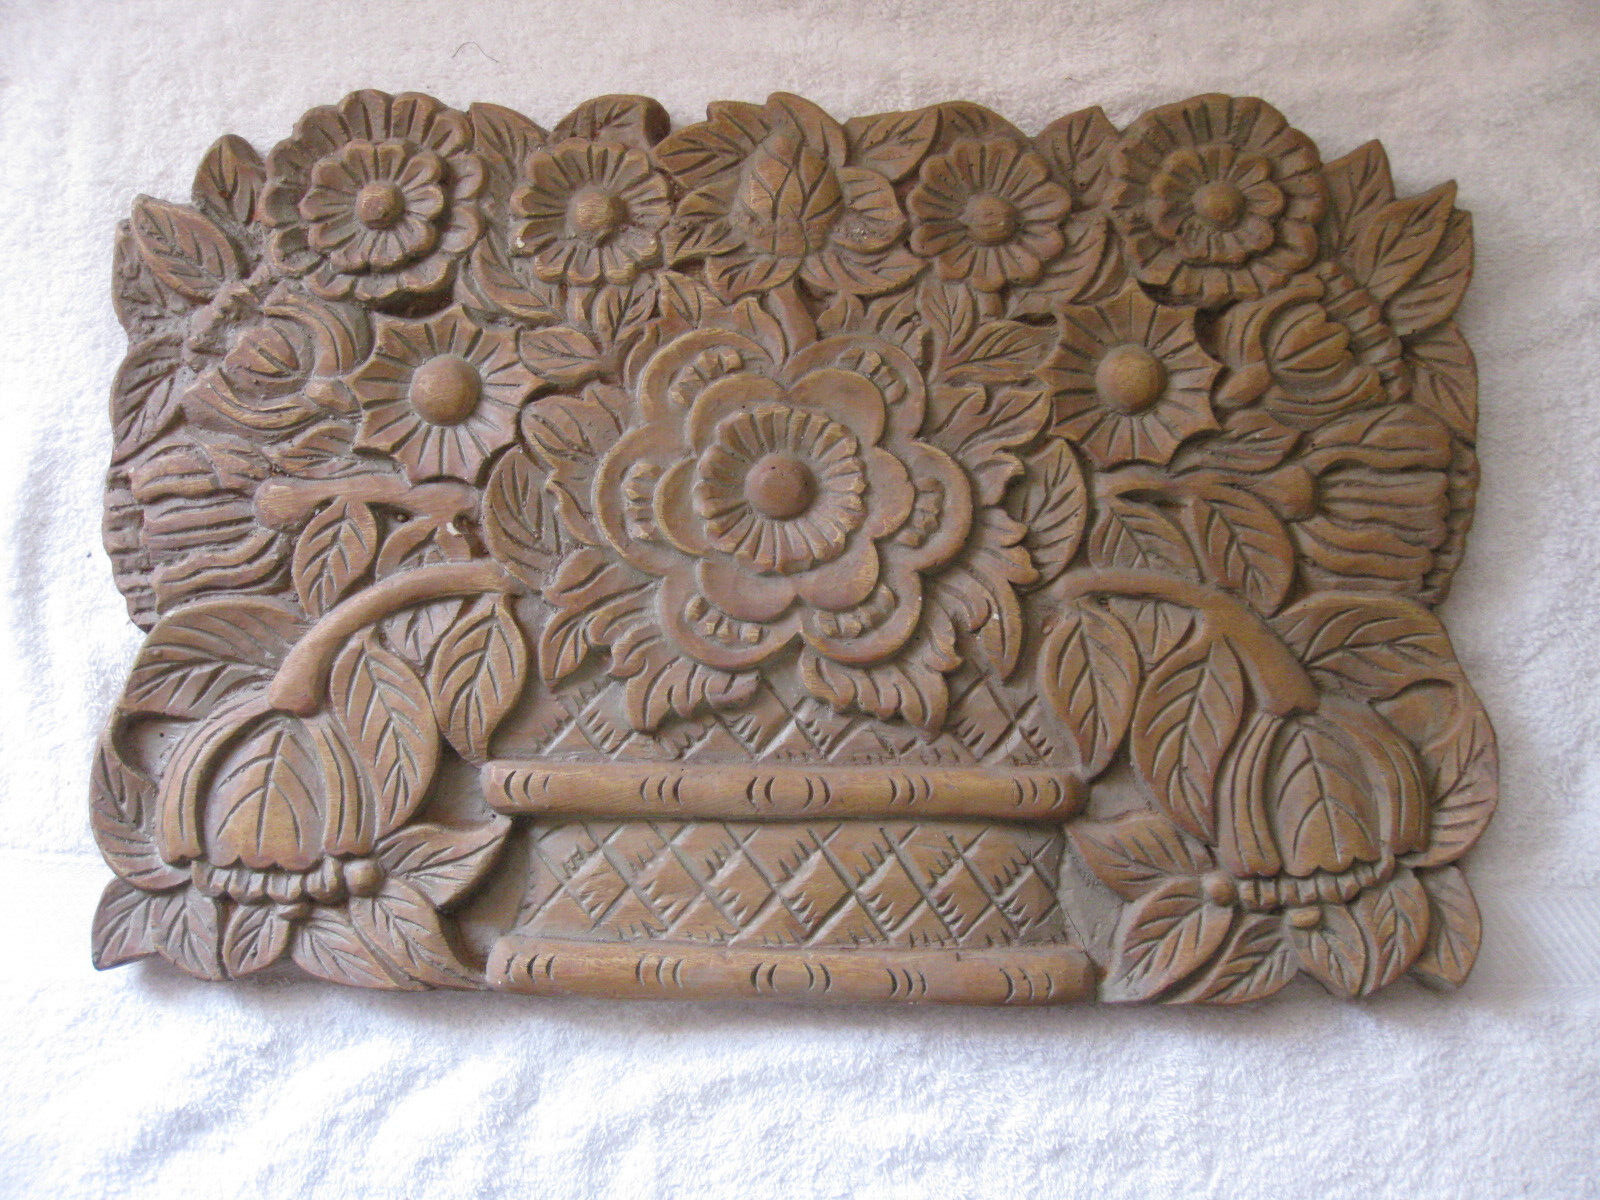 RARE VINTAGE CEMENT GARDEN WALL HANGING OF A BASKET OF FLOWERS, GREAT DETAIL